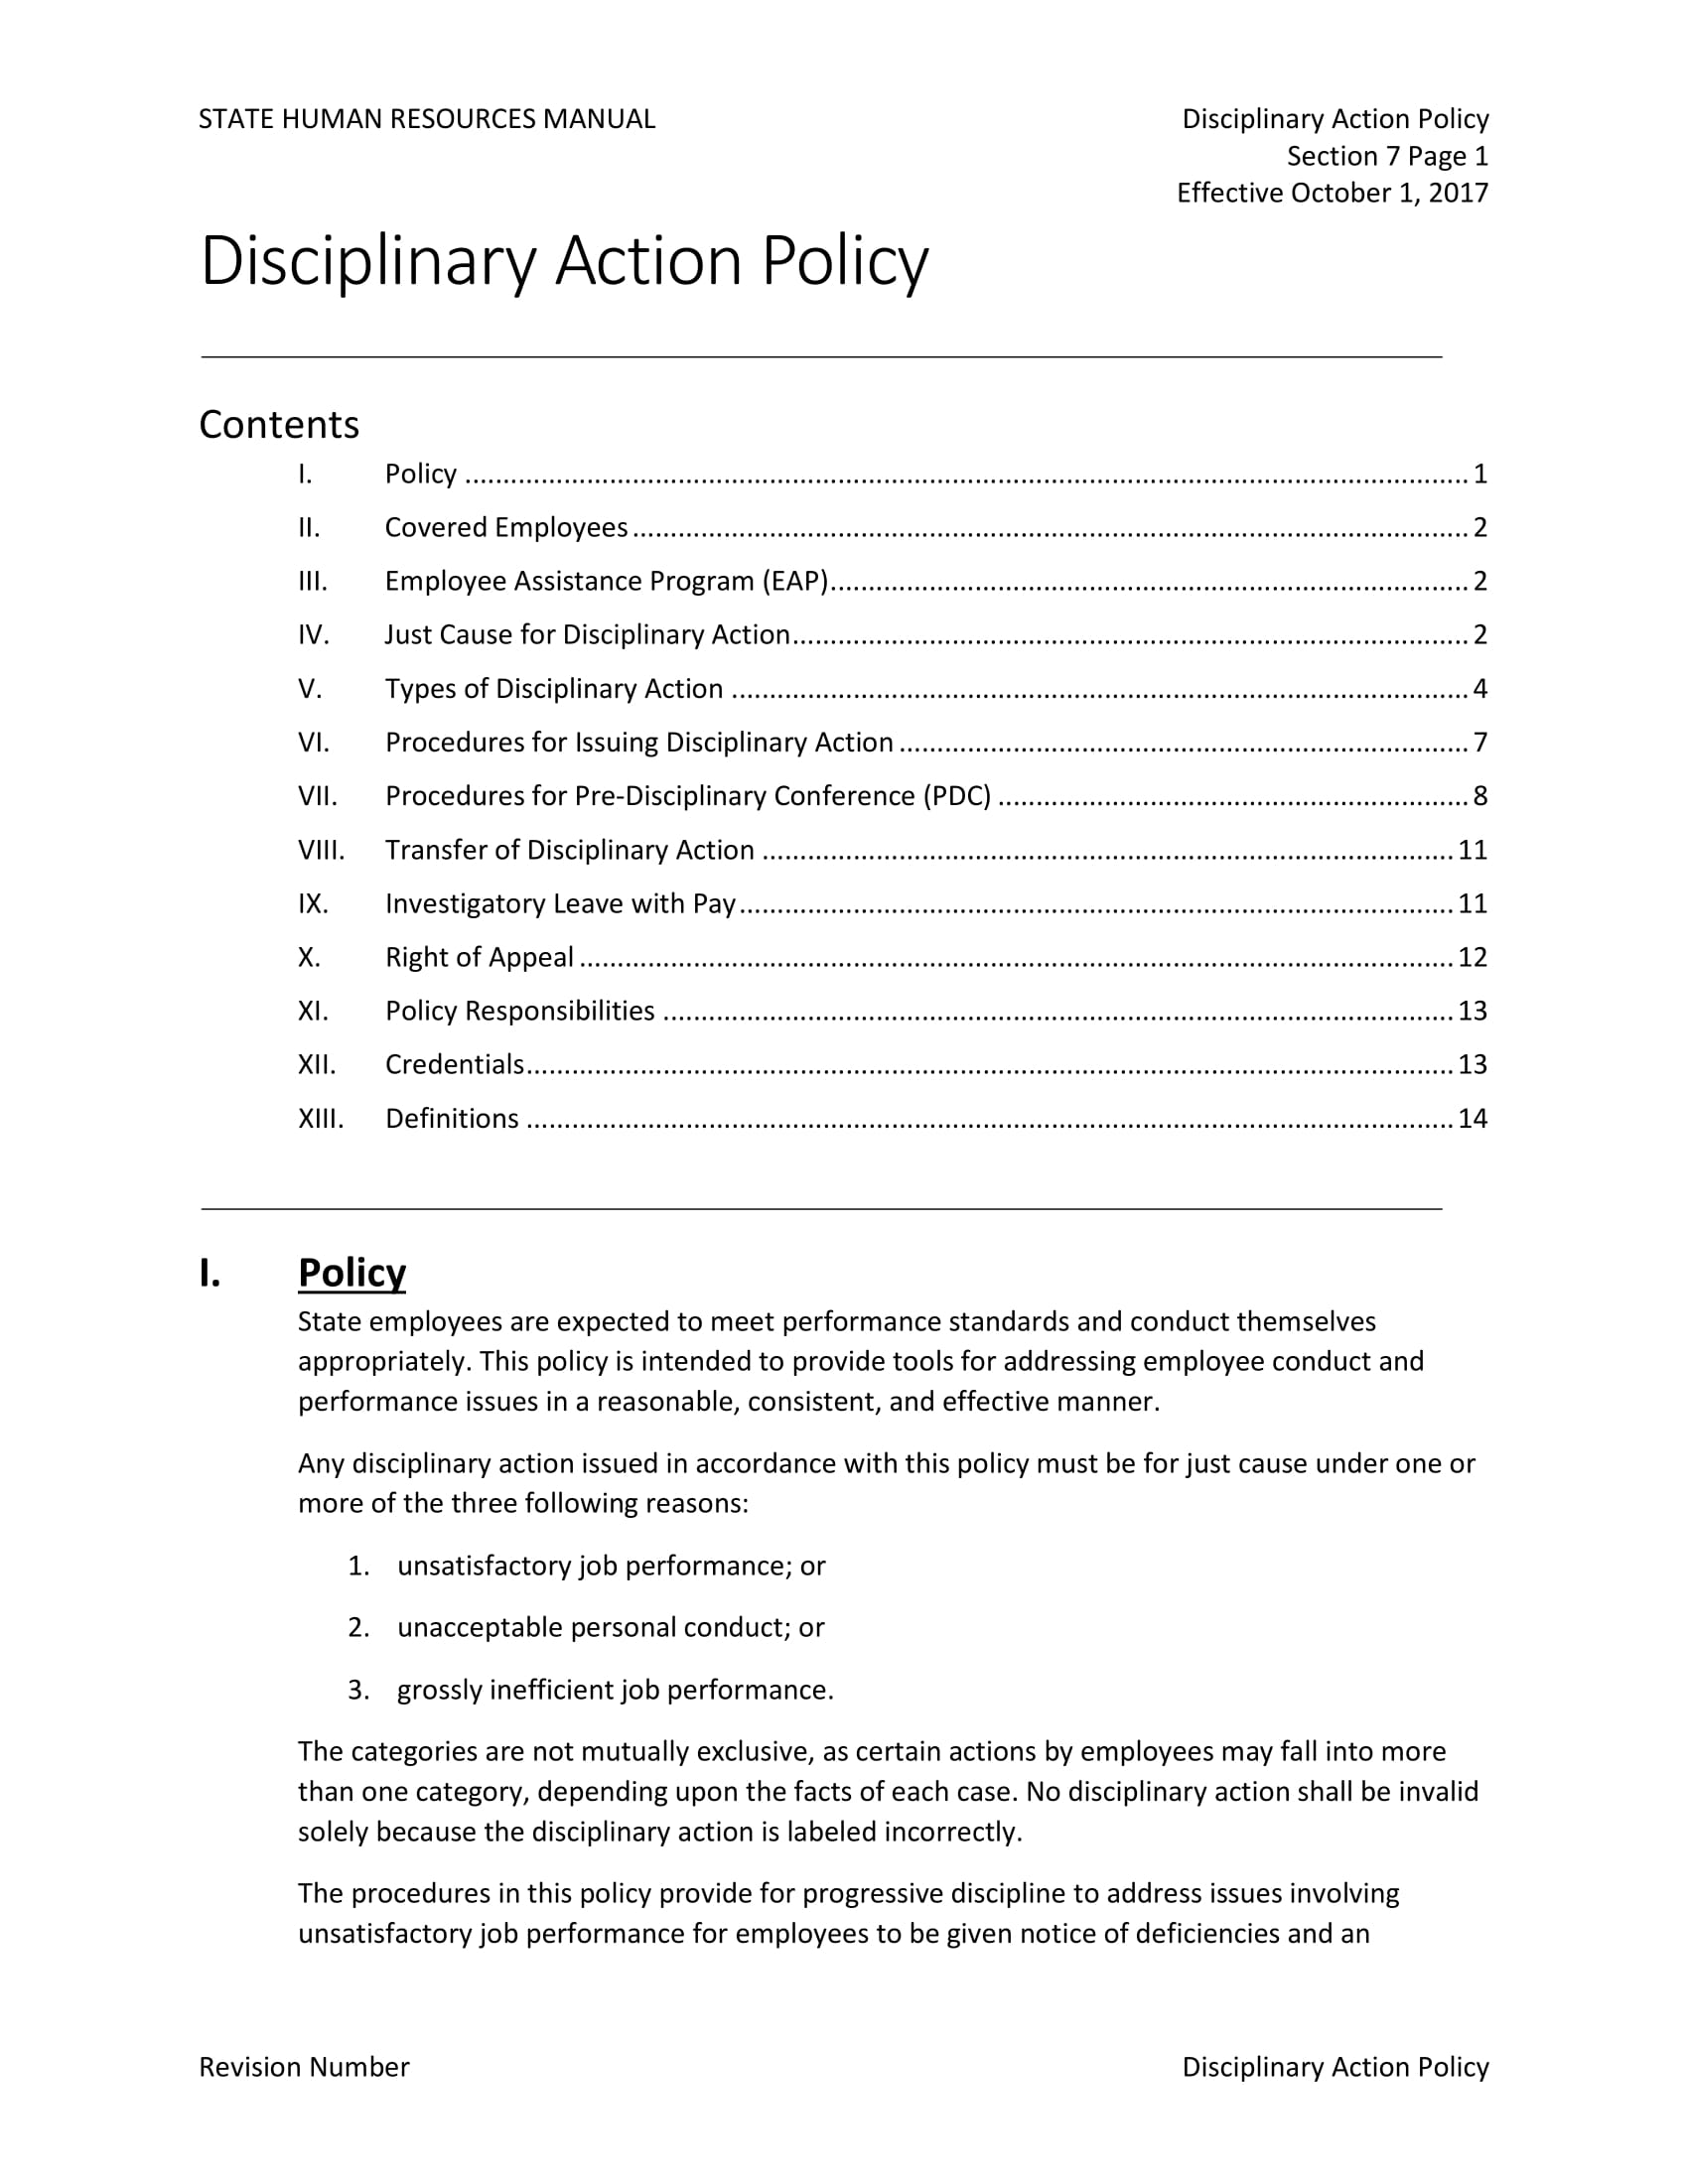 comprehensive disciplinary action policy example